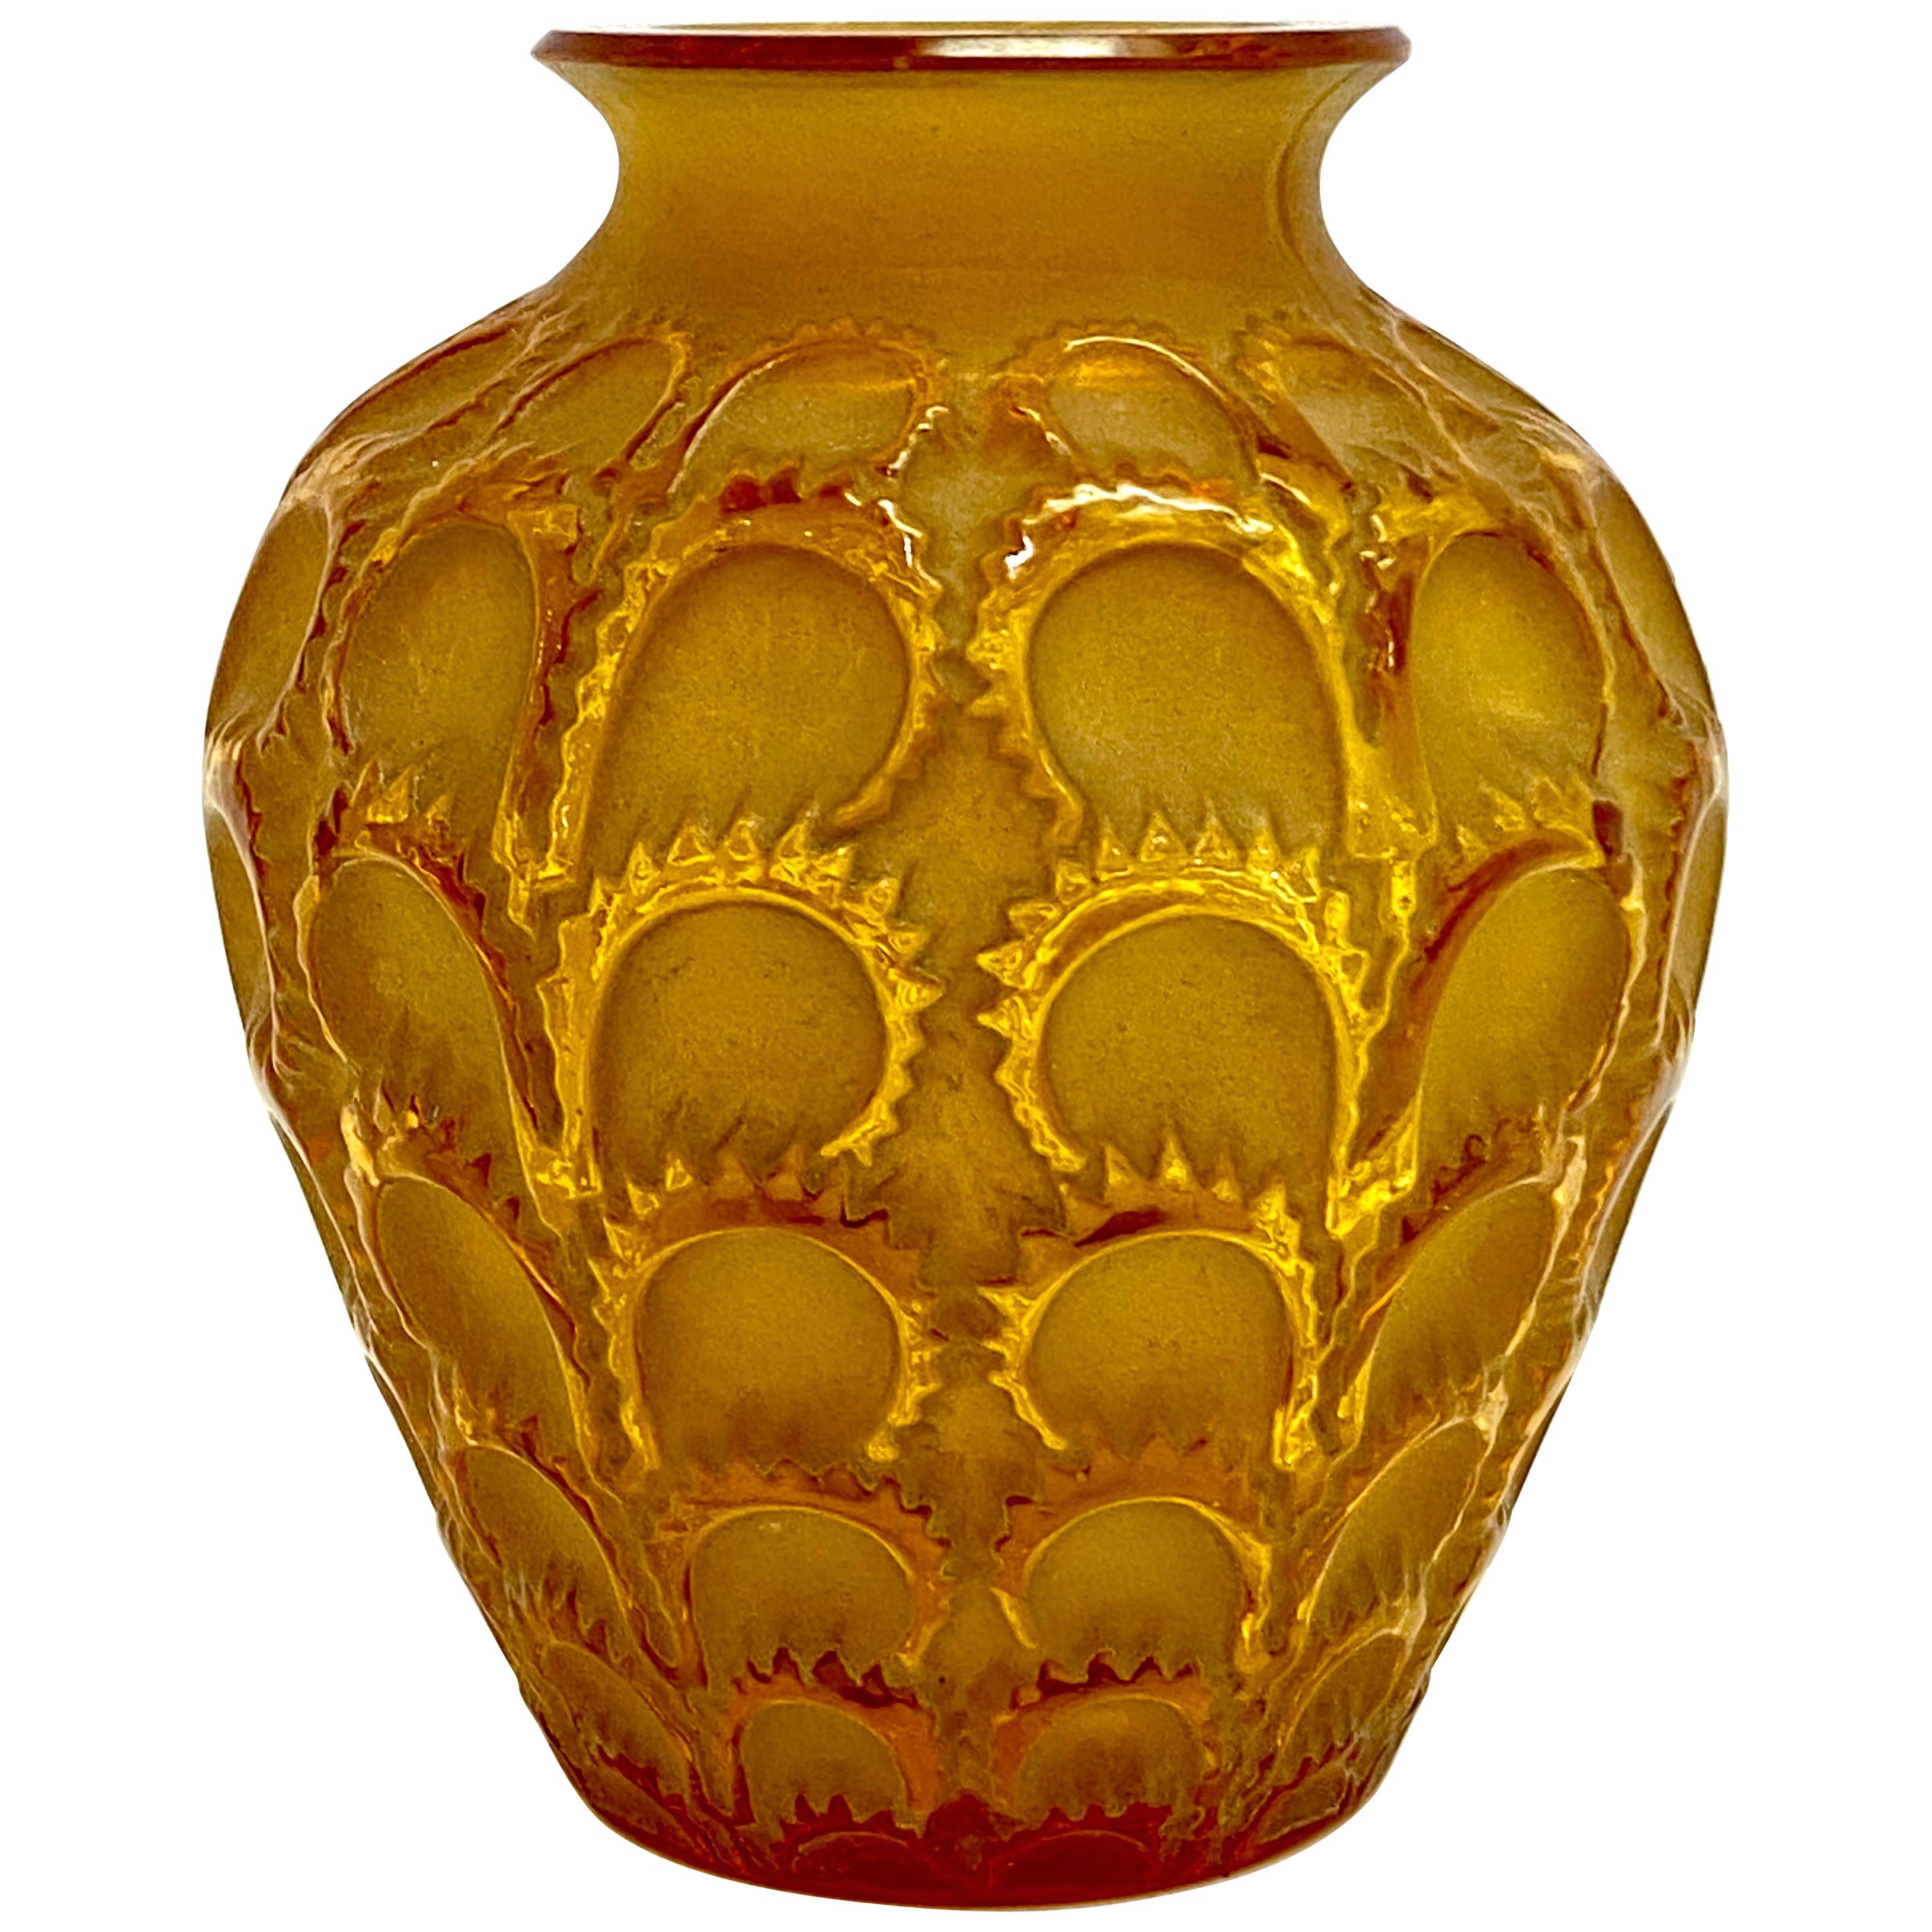 1931 René Lalique Laiterons Vase in Yellow Amber Glass Sepia with Beige Patina